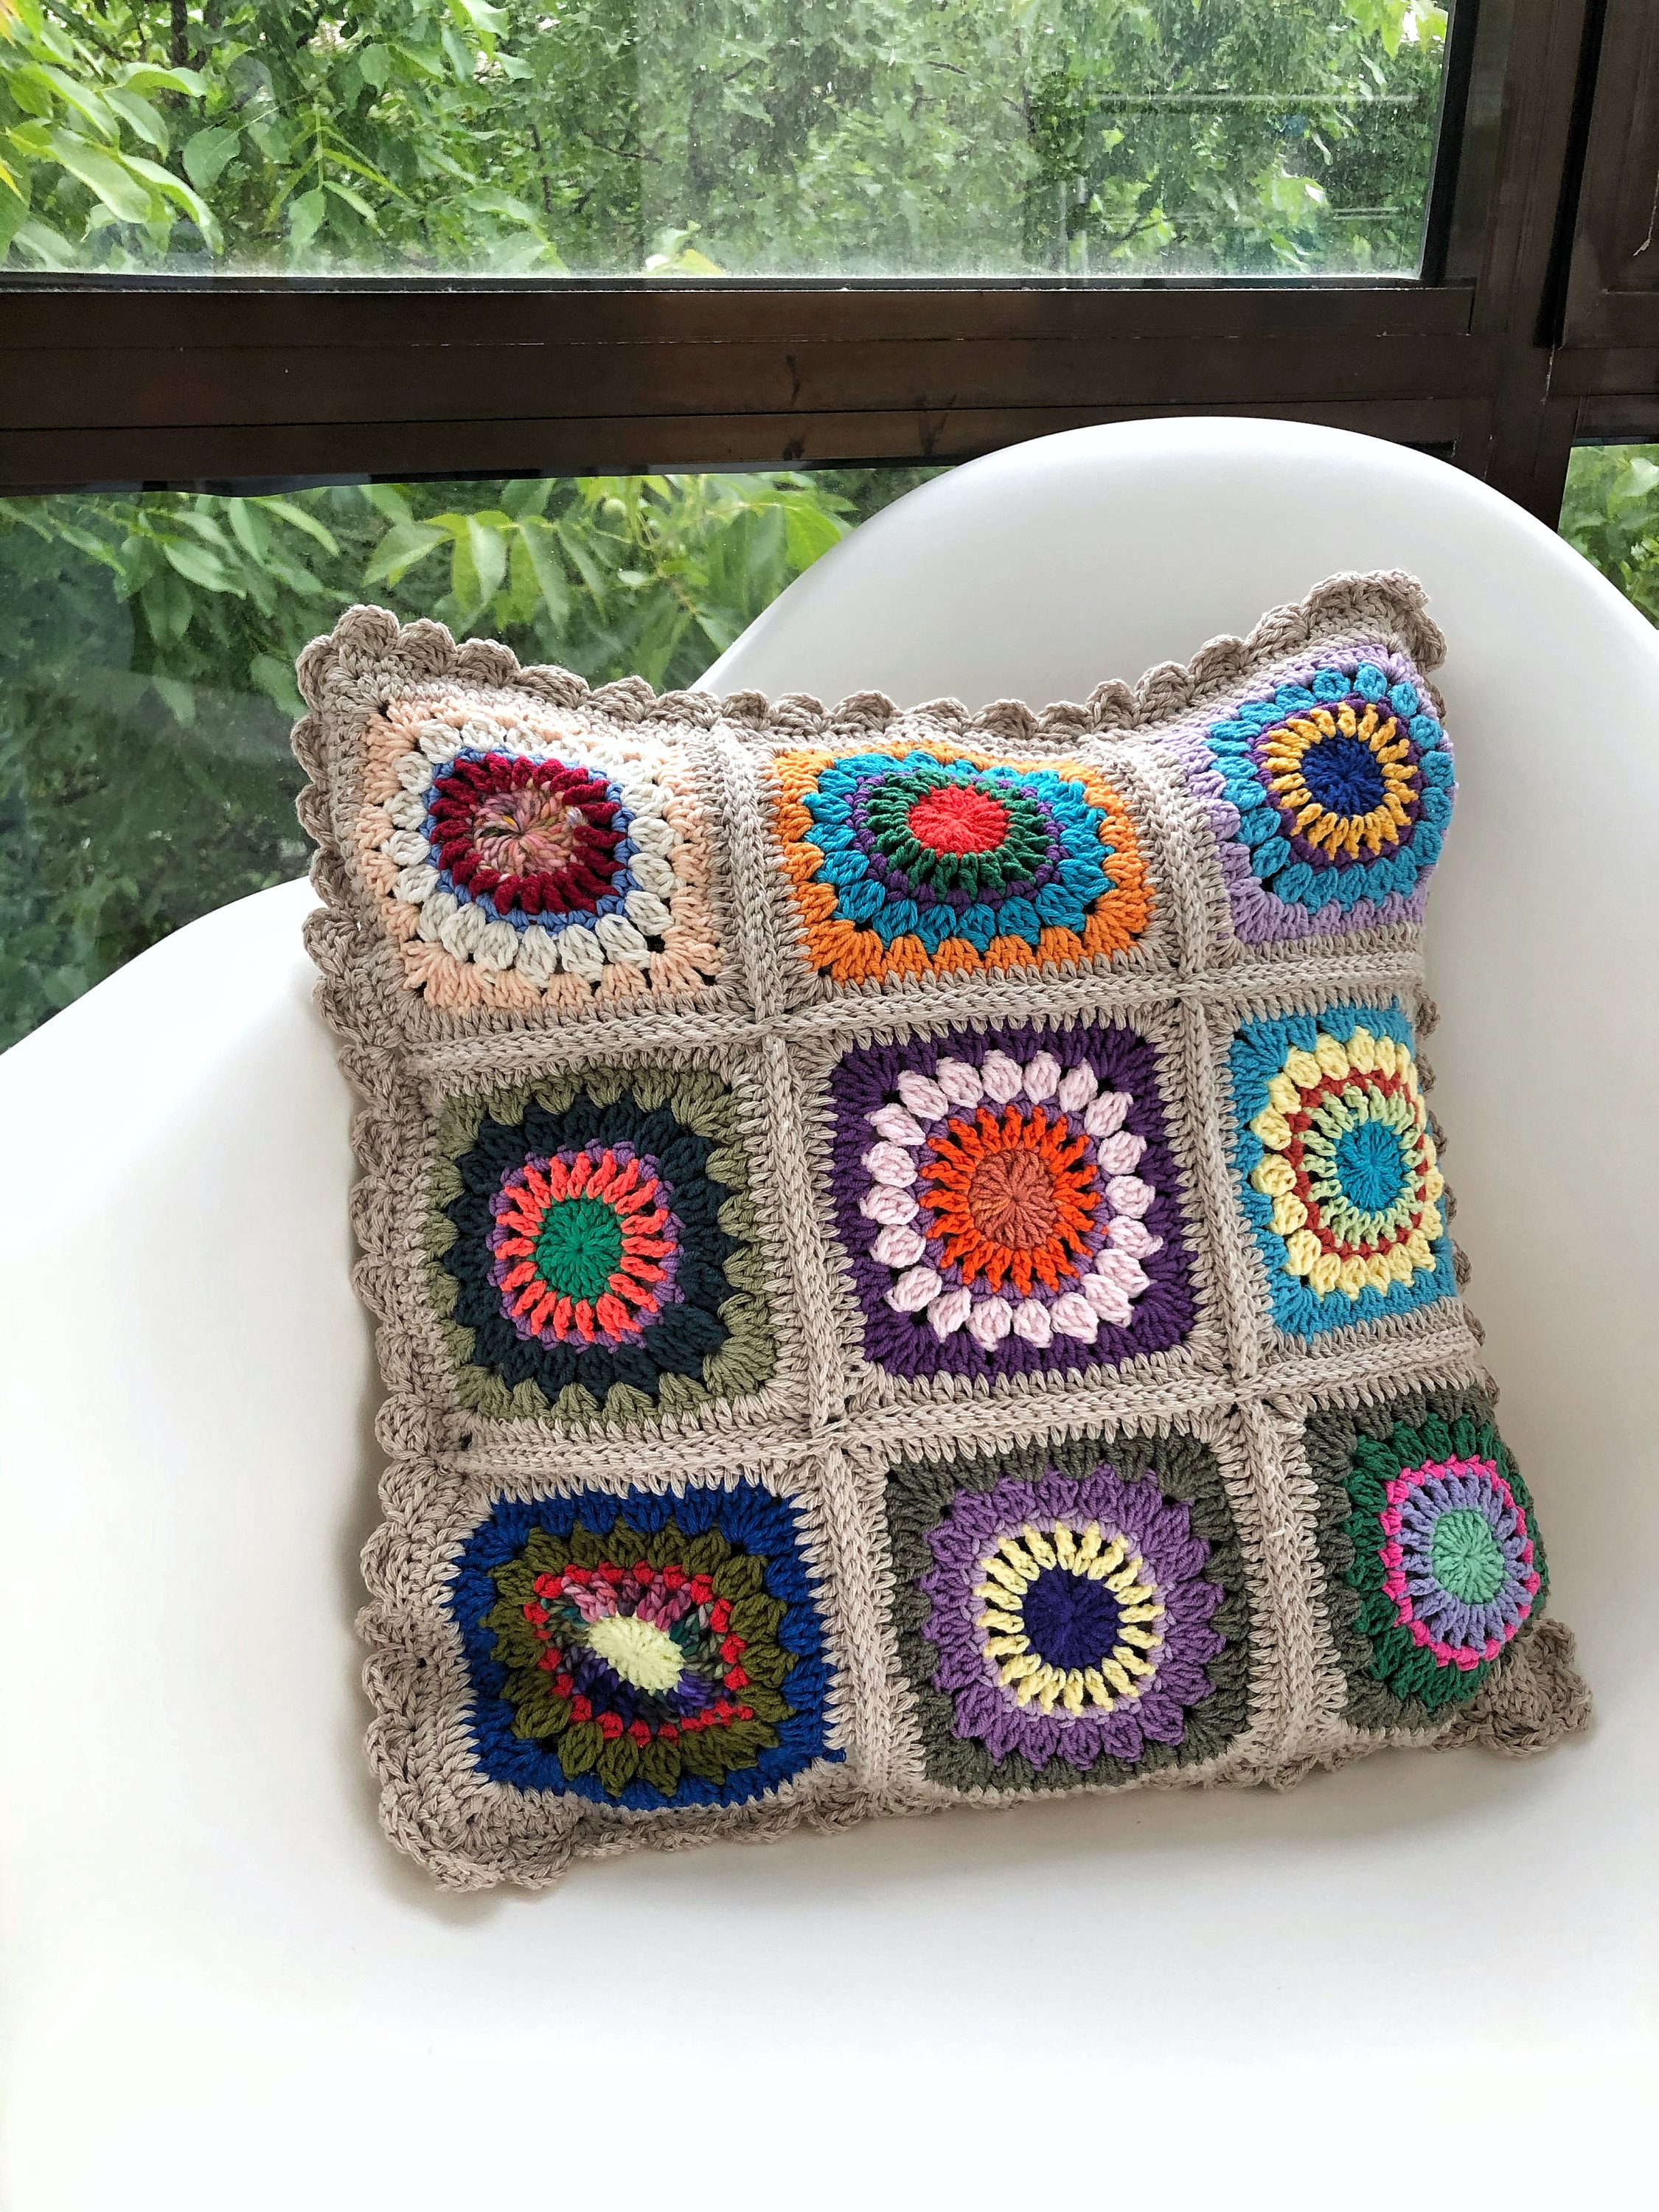 Crochet Pillow Cover Kandinsky Klimt, Squishy Colourful Artistic Handmade  Case, Bed Back Rest Support, Granny Square Maternity Knee Cushion 